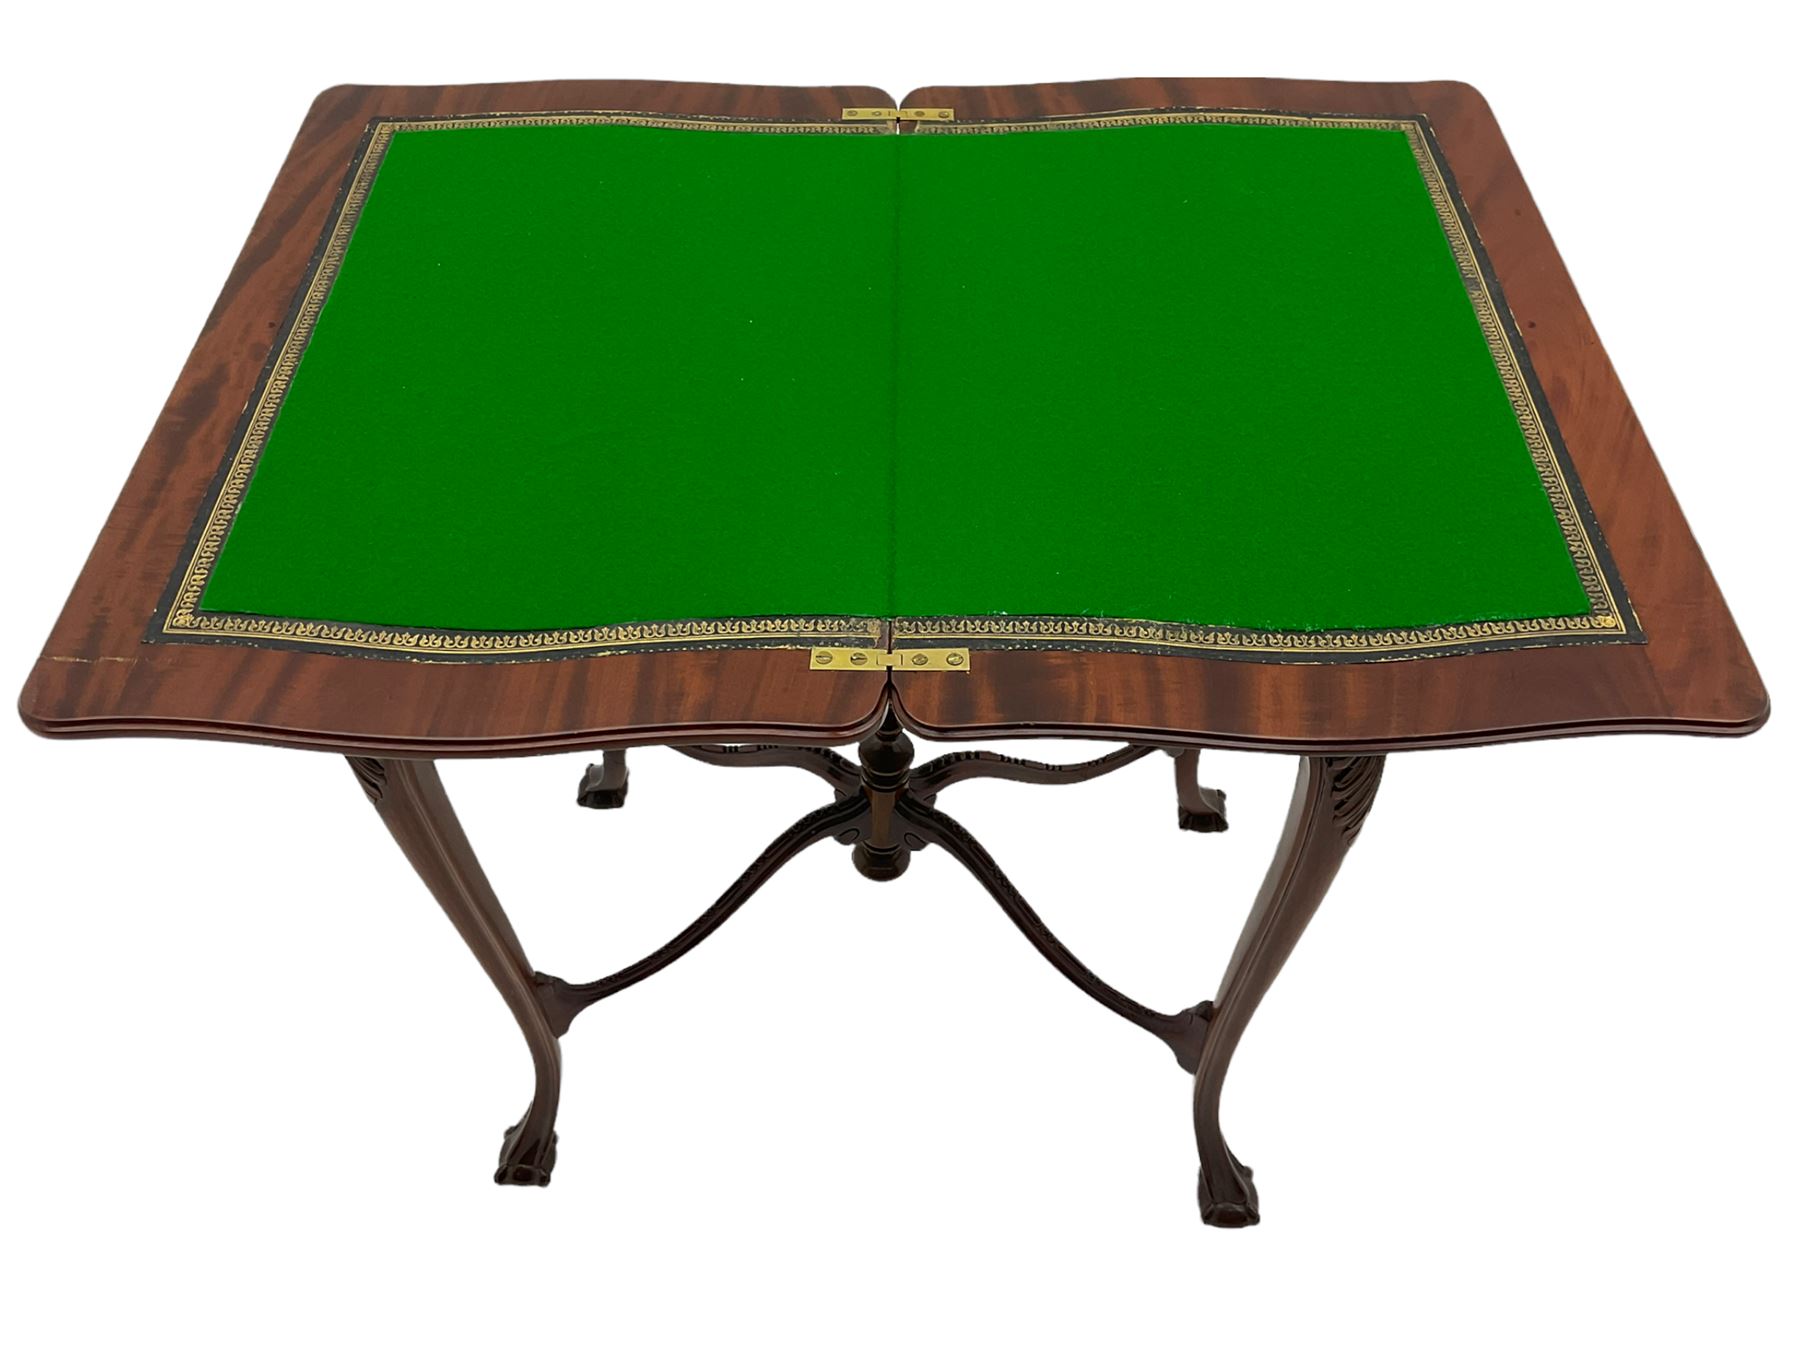 Early 20th century mahogany at classical design card table - Image 3 of 4